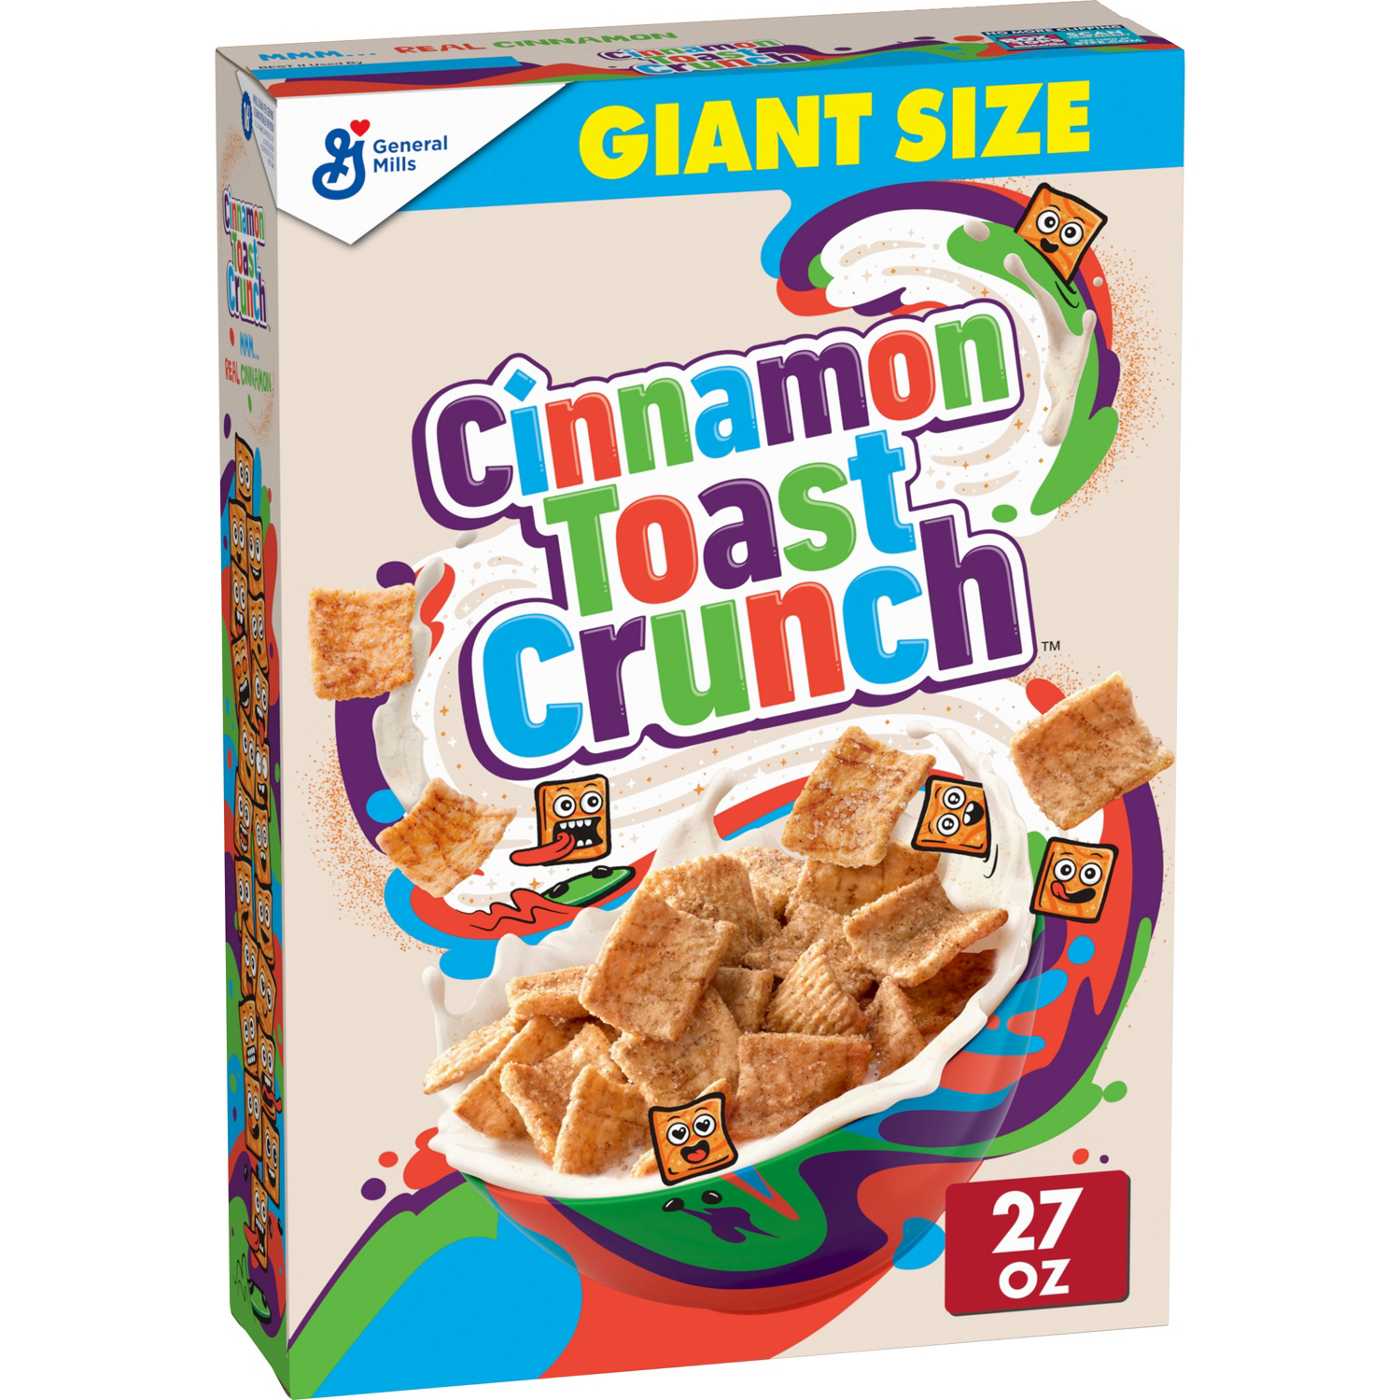 General Mills Cinnamon Toast Crunch Cereal - Giant Size; image 1 of 5